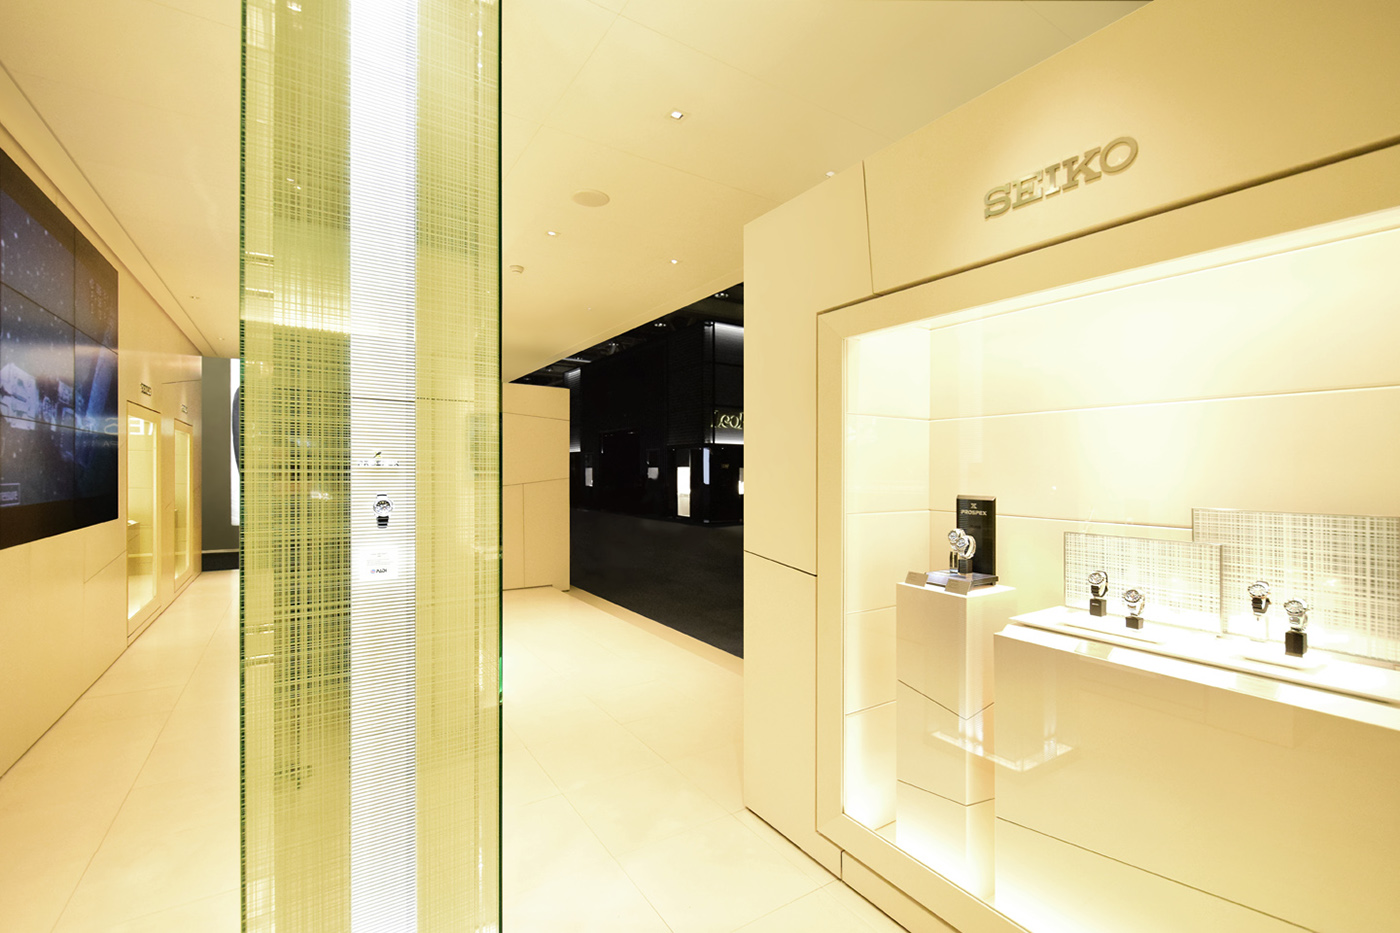 SEIKO baselworld exhibition stand messestand